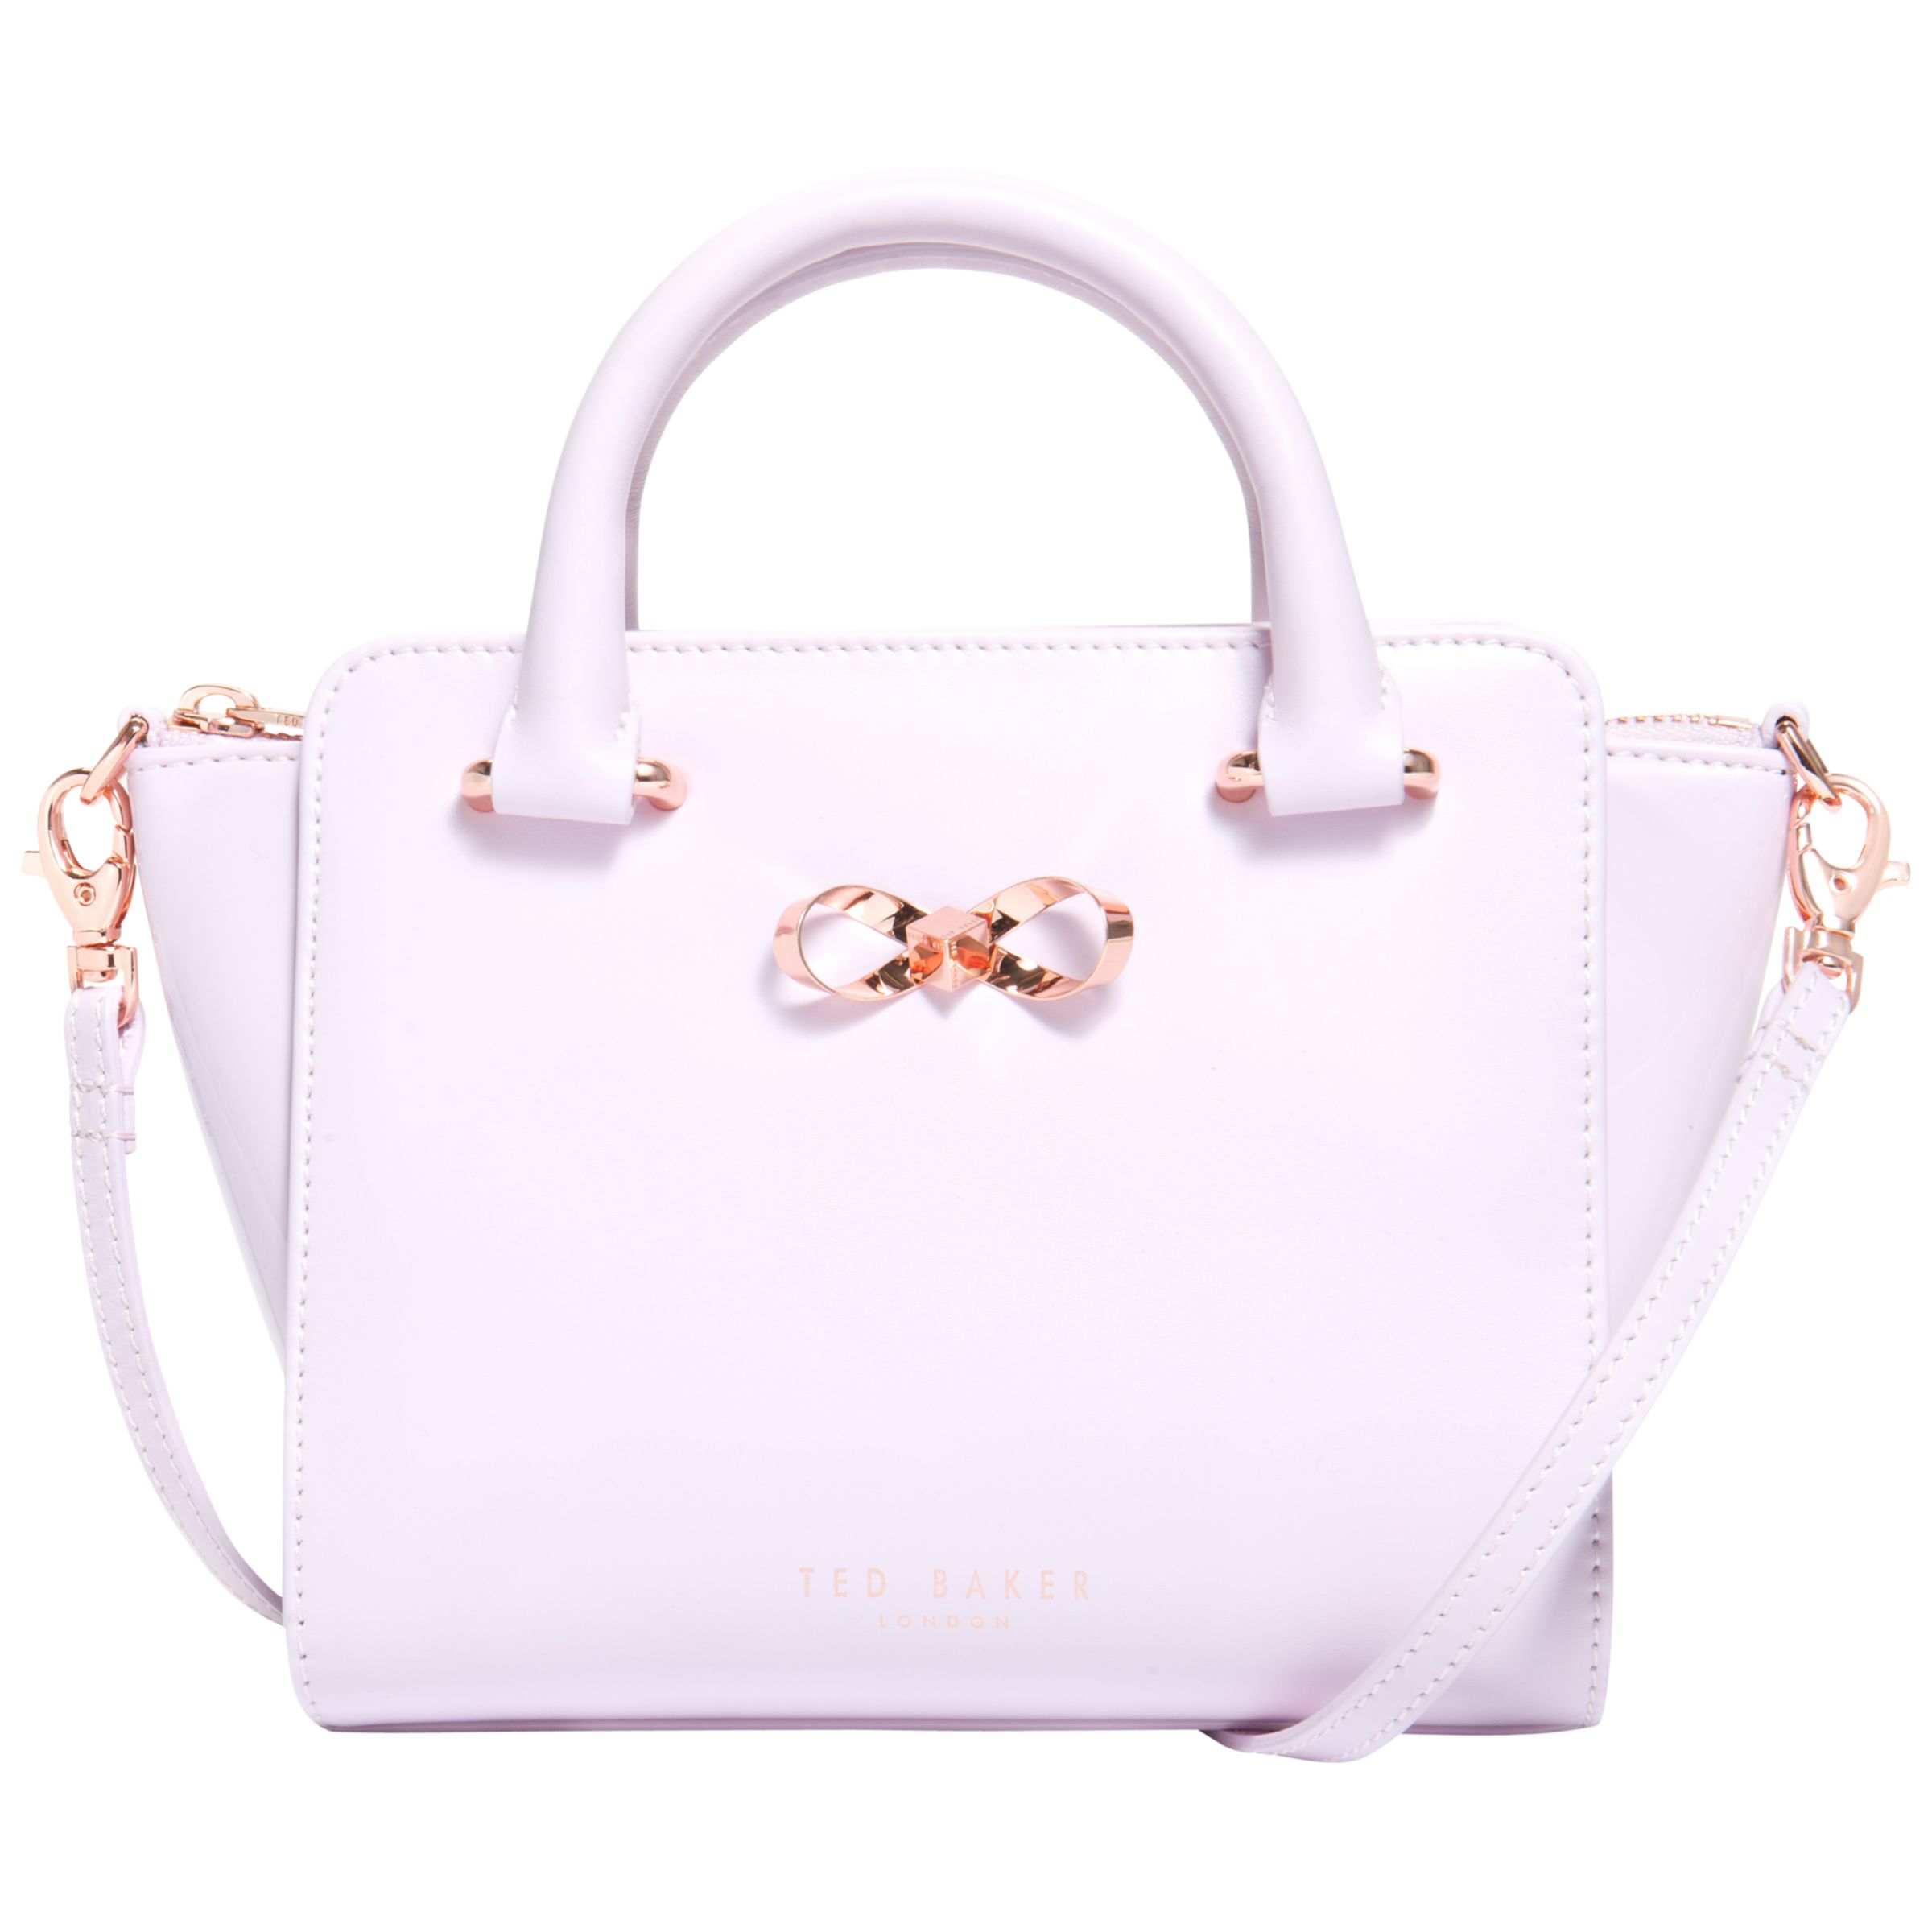 Ted Baker Perie Bow Mini Leather Tote Bag